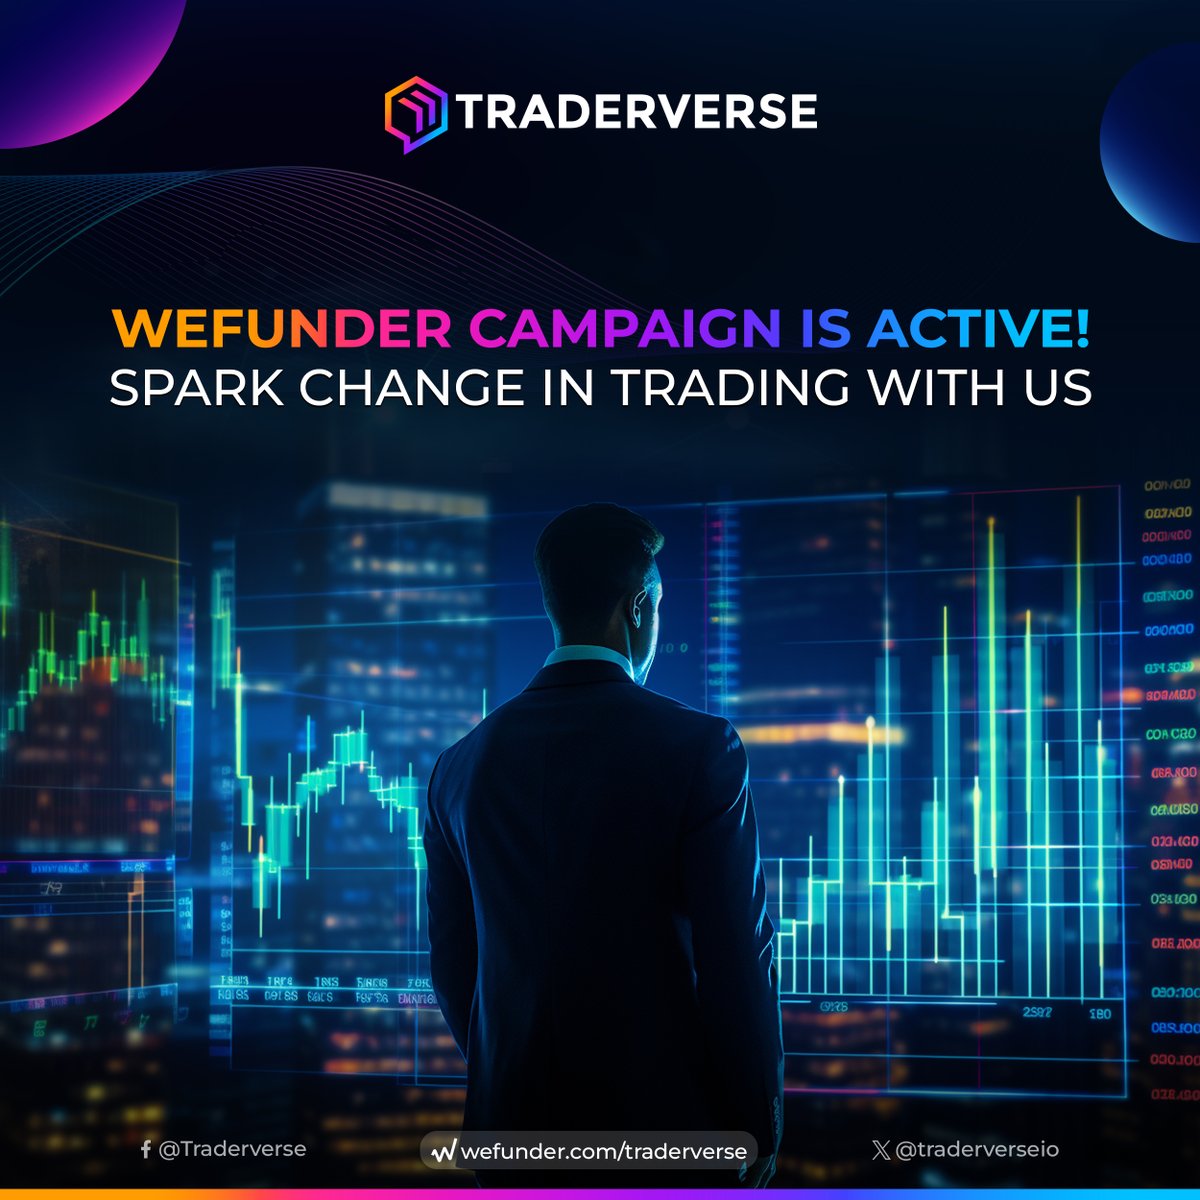 Our Wefunder campaign is active! Spark change in trading by joining us at Traderverse. Let's innovate the trading world together! 

Visit: wefunder.com/traderverse

#Fintech #Investment #Stock #Crypto #Trading #SocialNetworking #TradingTools